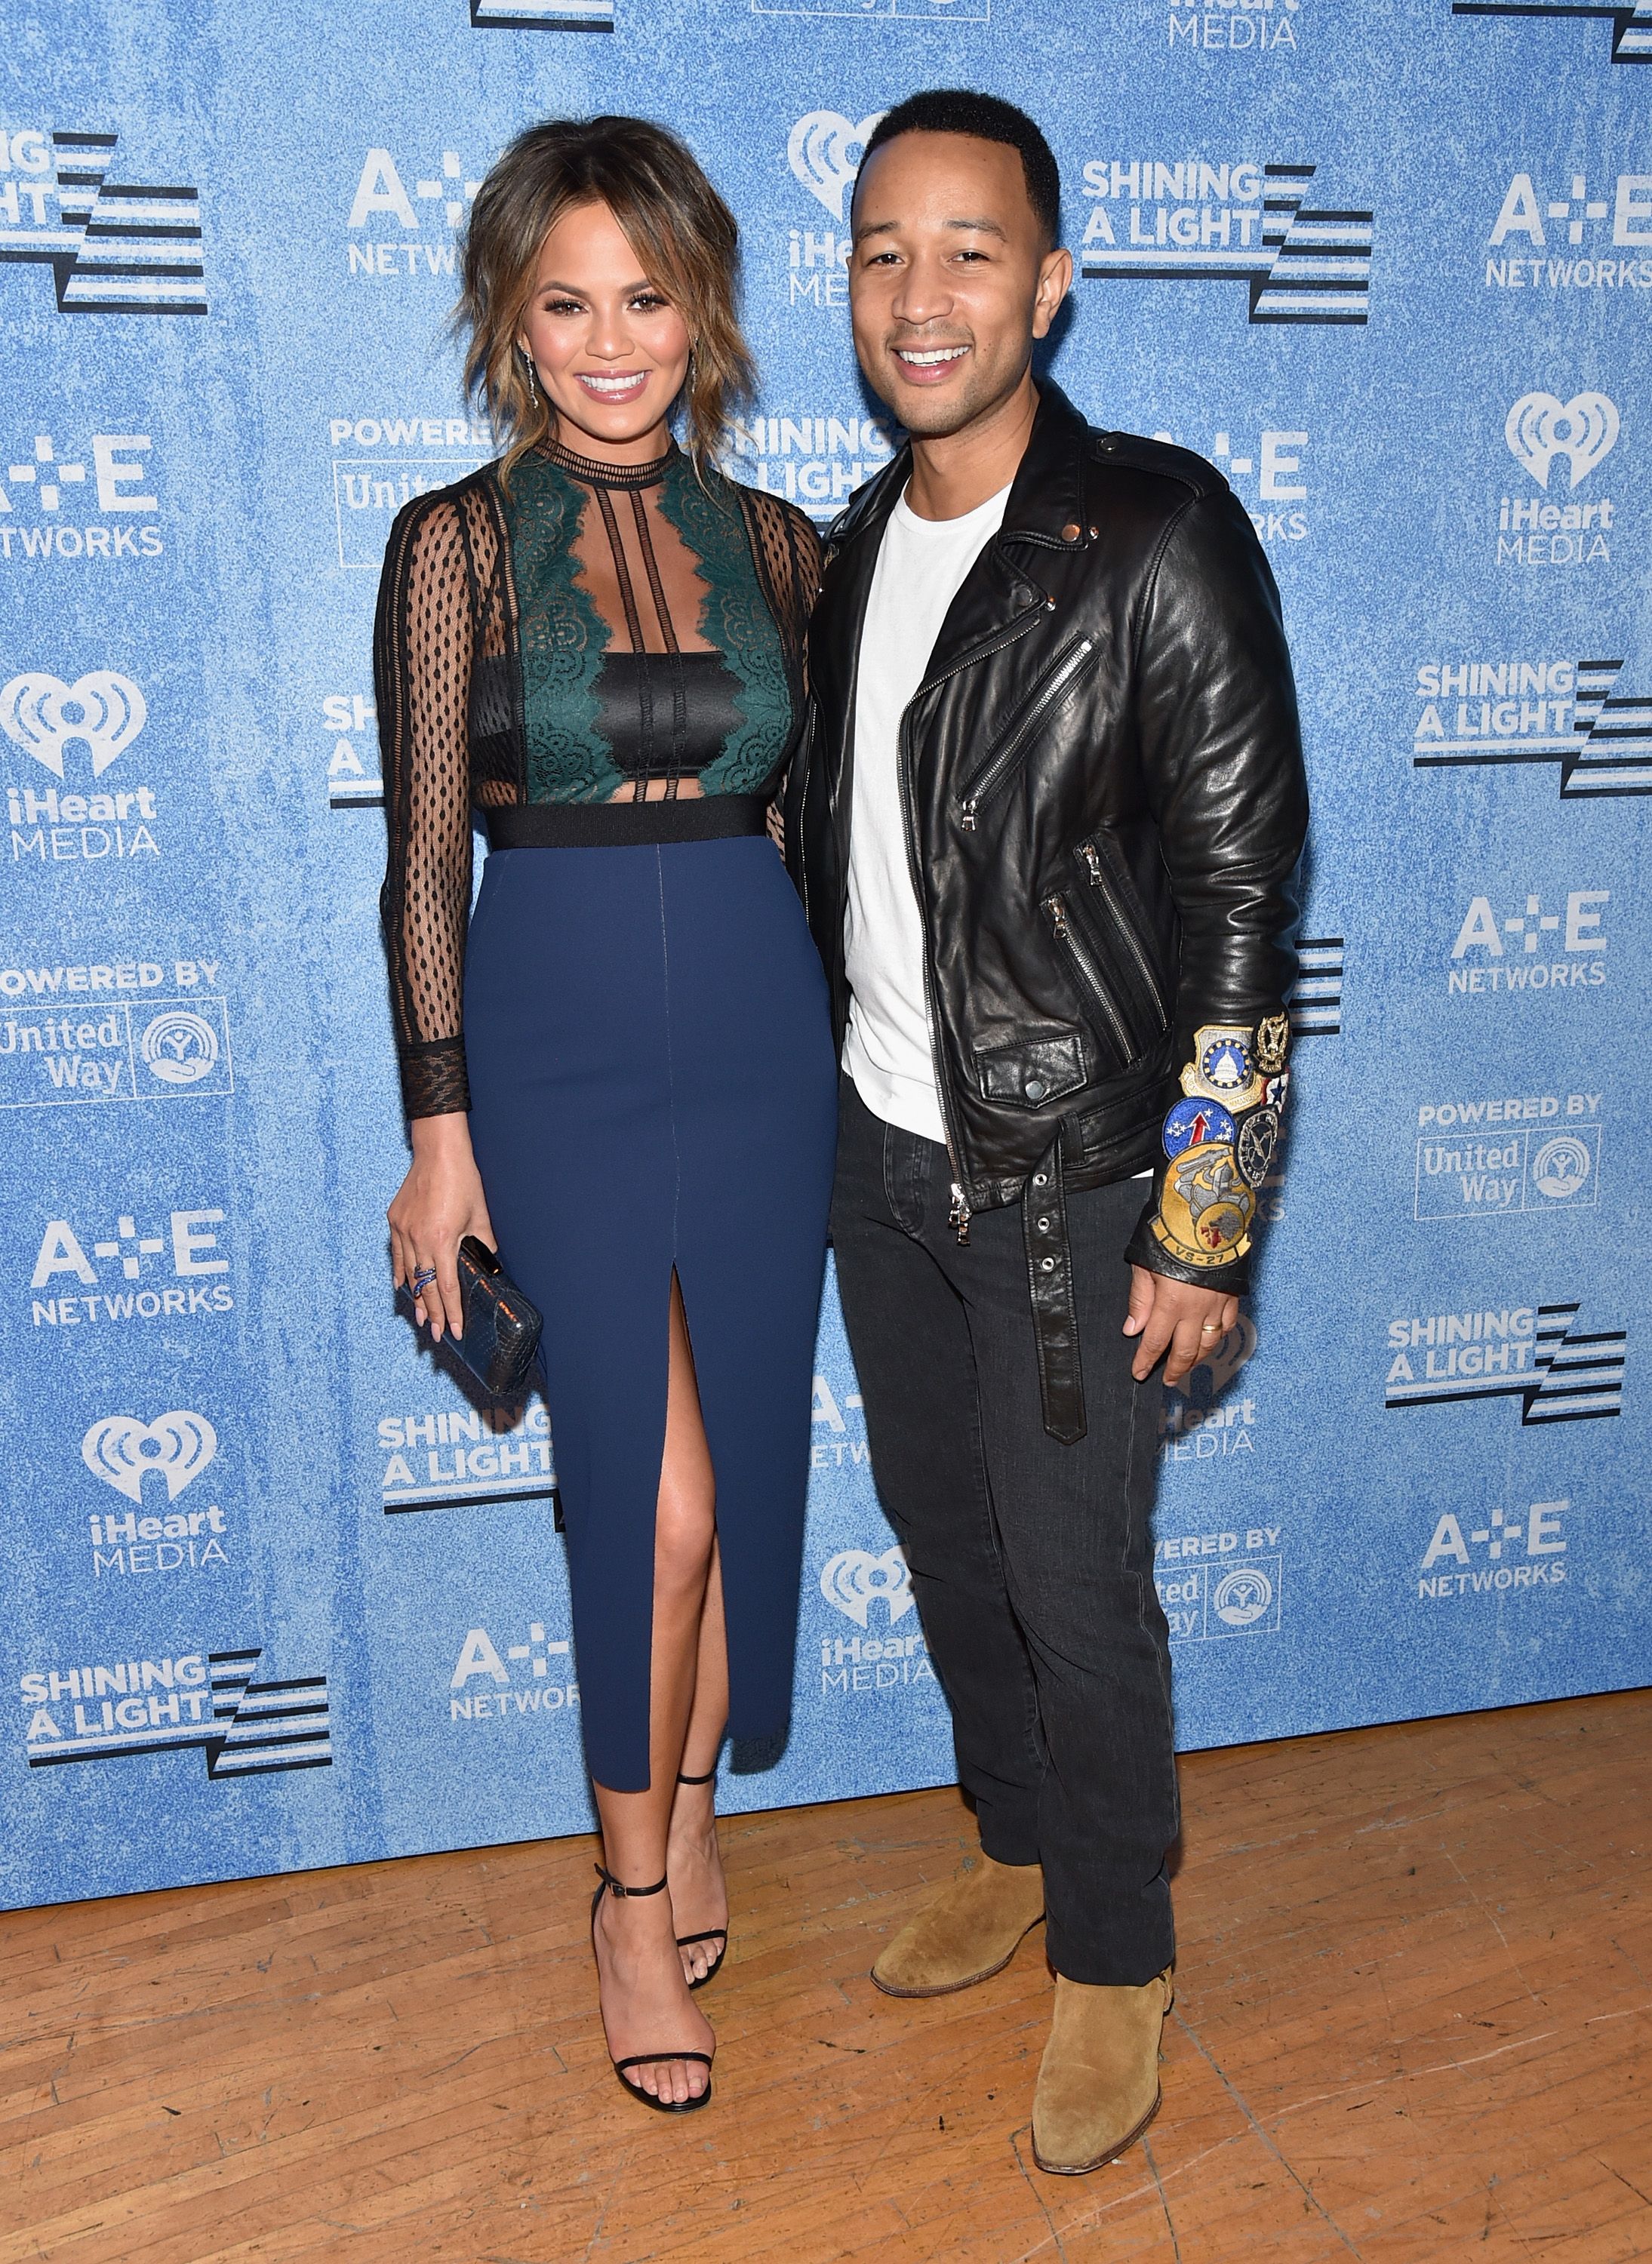 Chrissy Teigen and John Legend during A+E Networks' "Shining A Light" concert on November 18, 2015, in Los Angeles, California. | Source: Getty Images